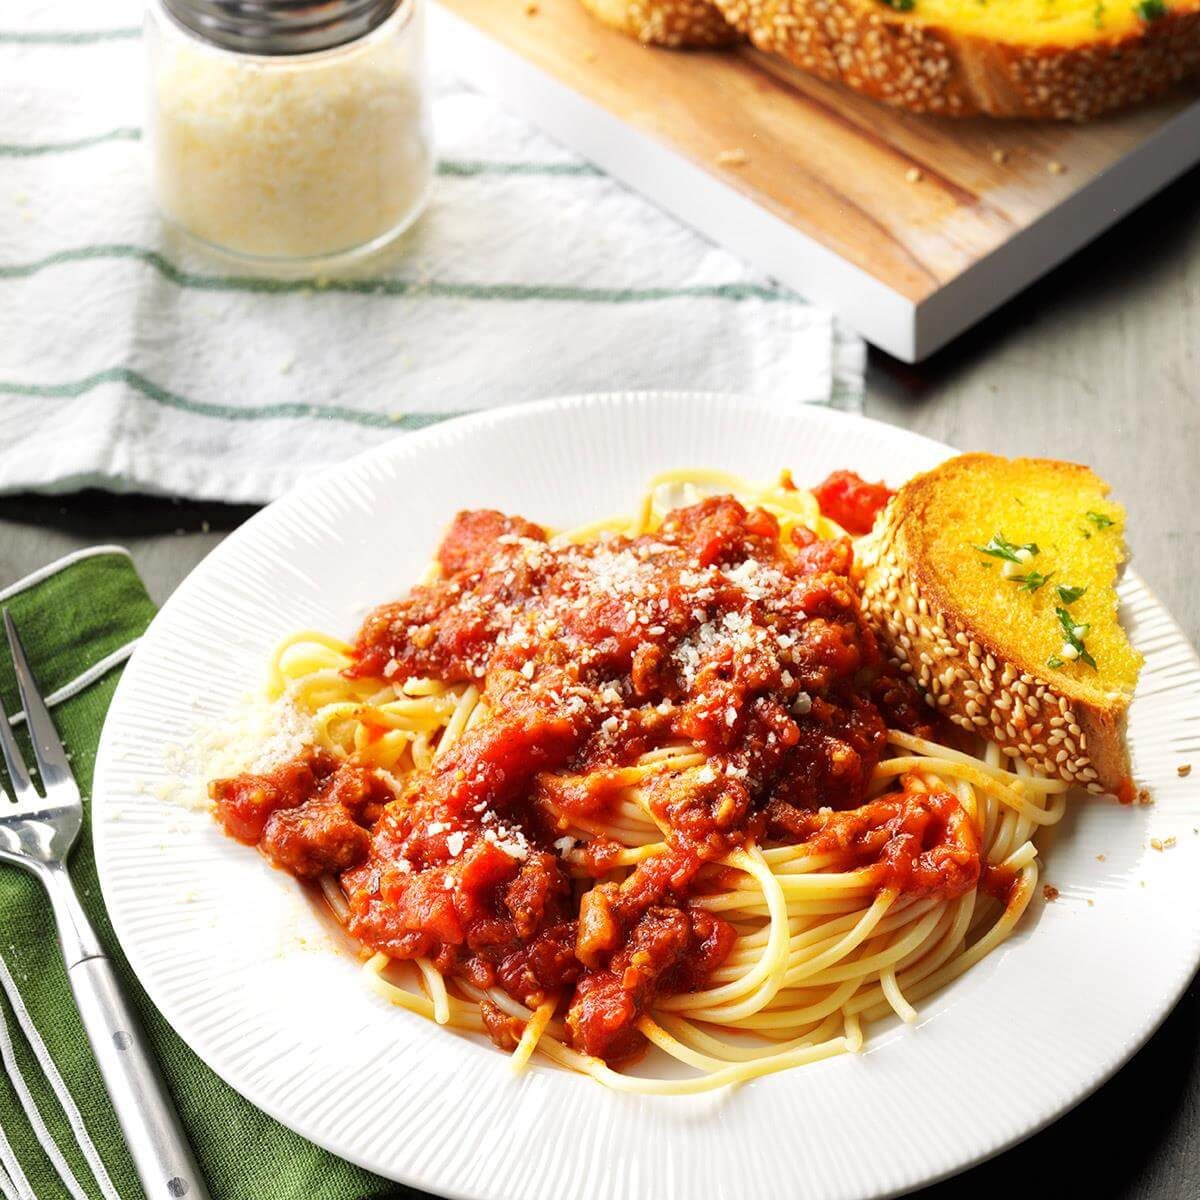 Slow-Cooked-Spaghetti-Sauce_EXPS_HSCBZ_11812-_D08_02_2b-12 | Taste of Home